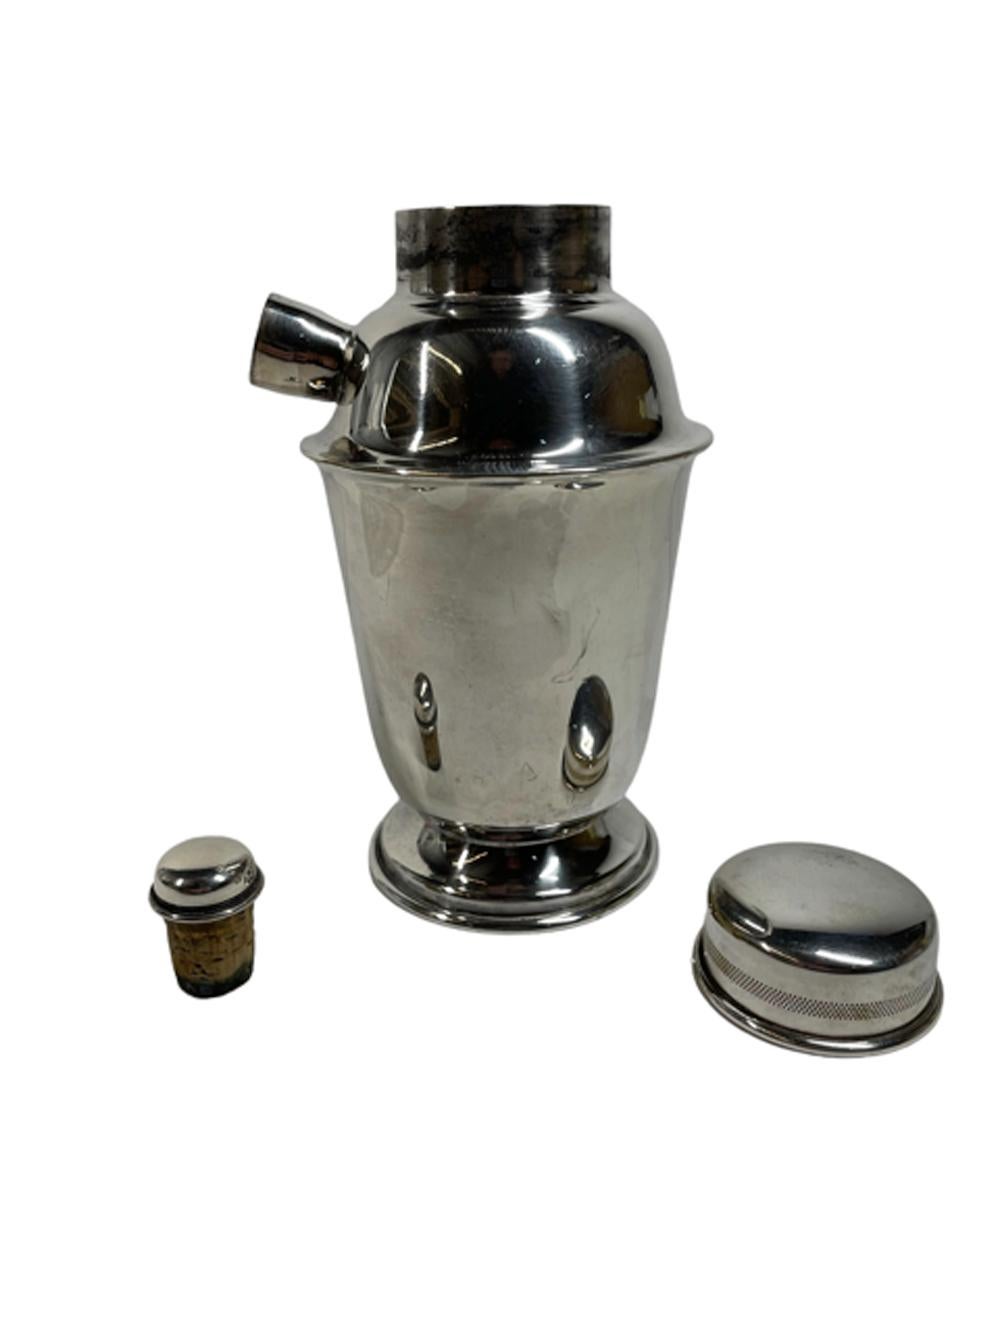 Art Deco Silve Plate Cocktail Shaker with Flared Shoulder on a Circular Foot  In Good Condition For Sale In Nantucket, MA